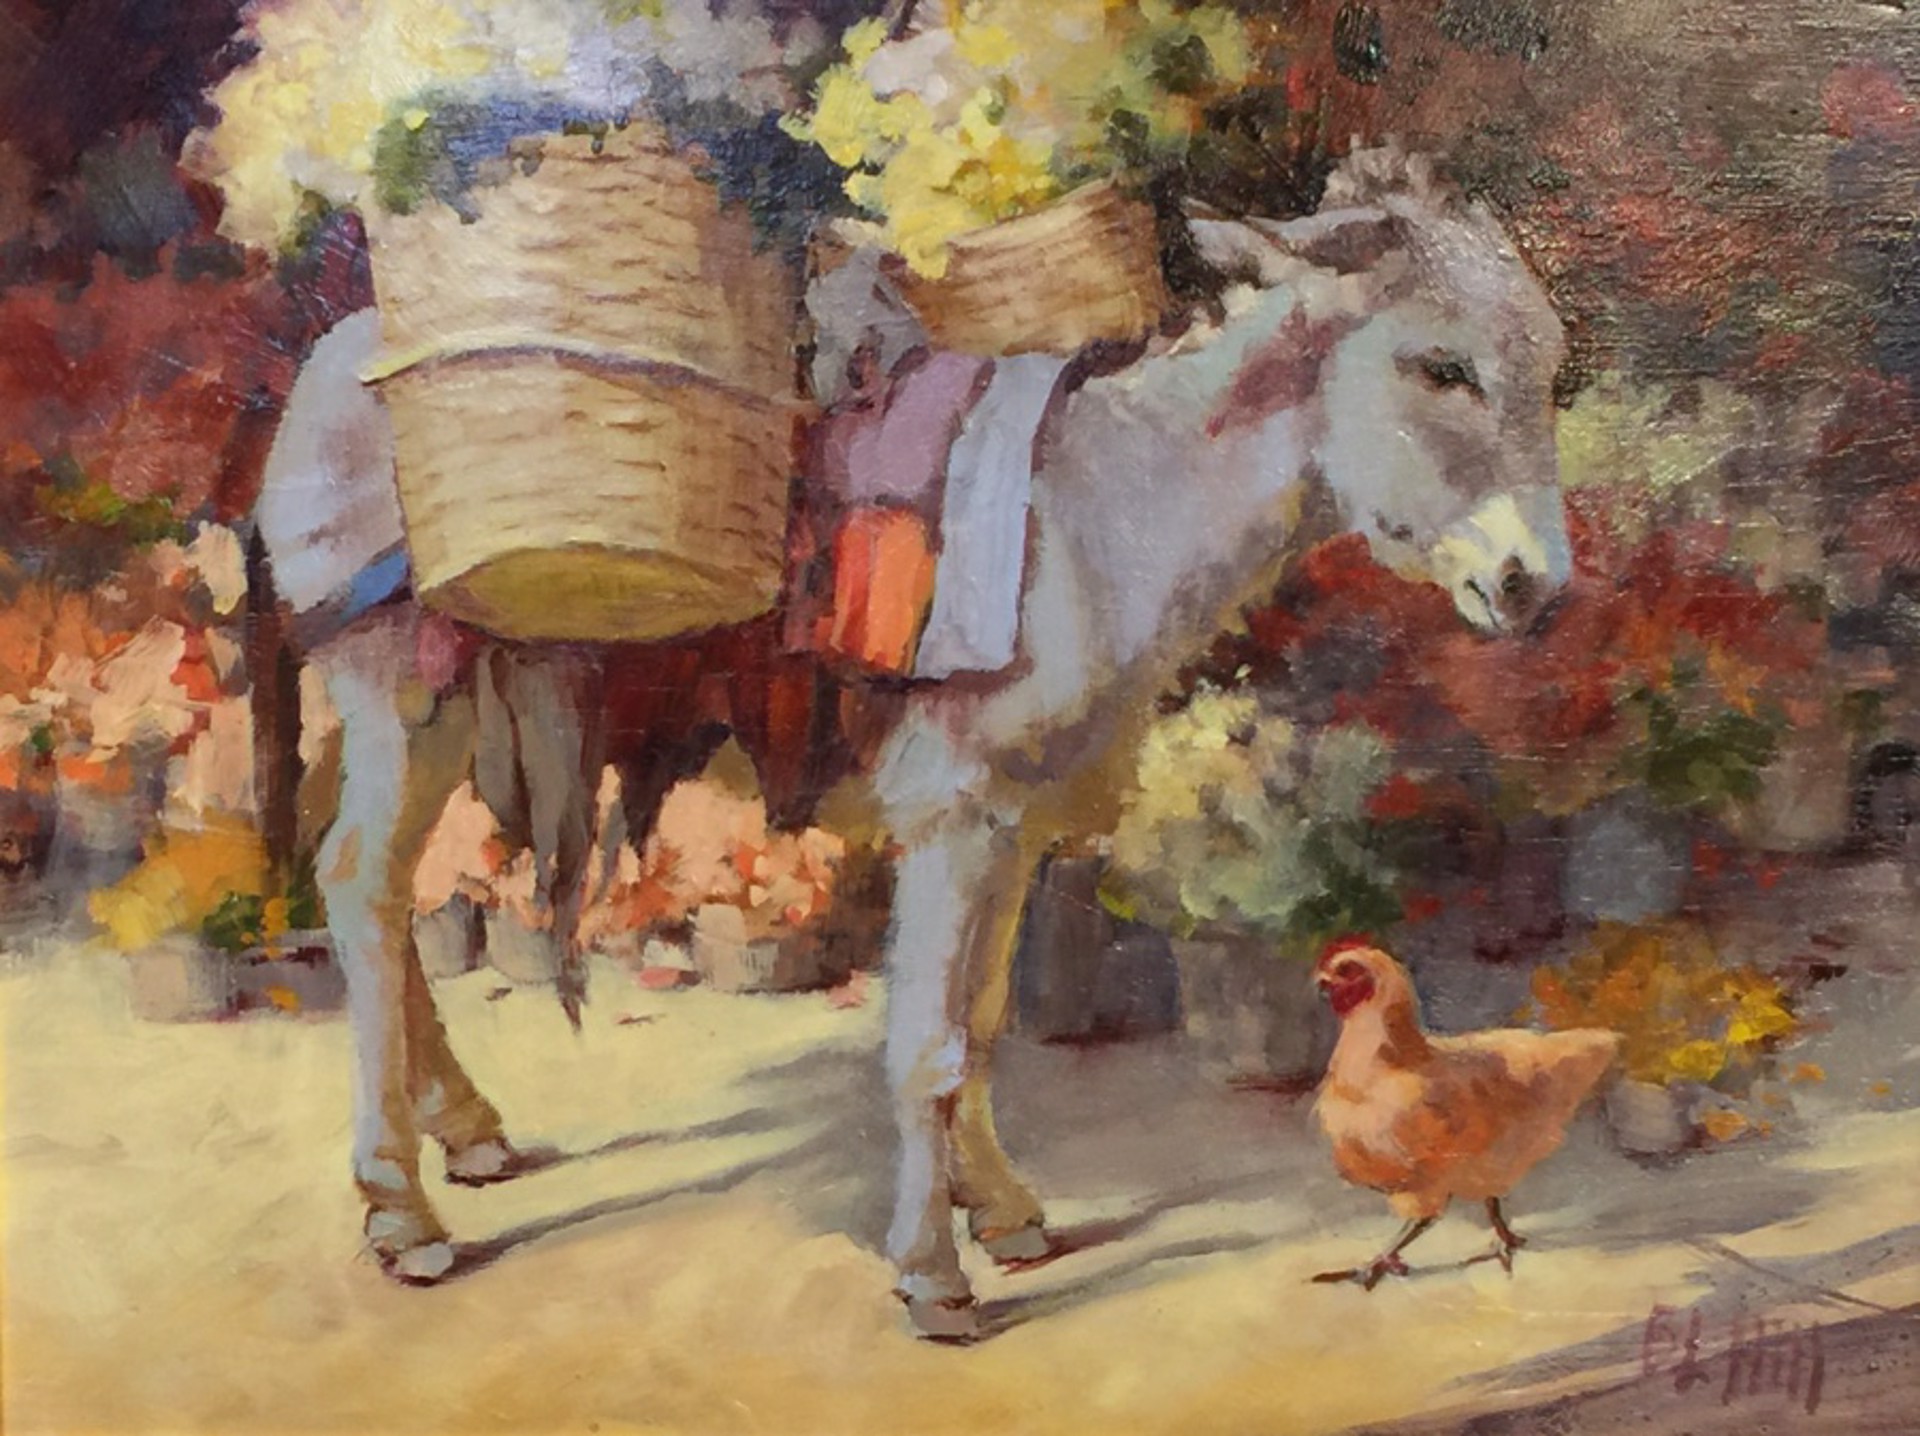 In The Flower Market by Barbara Hill